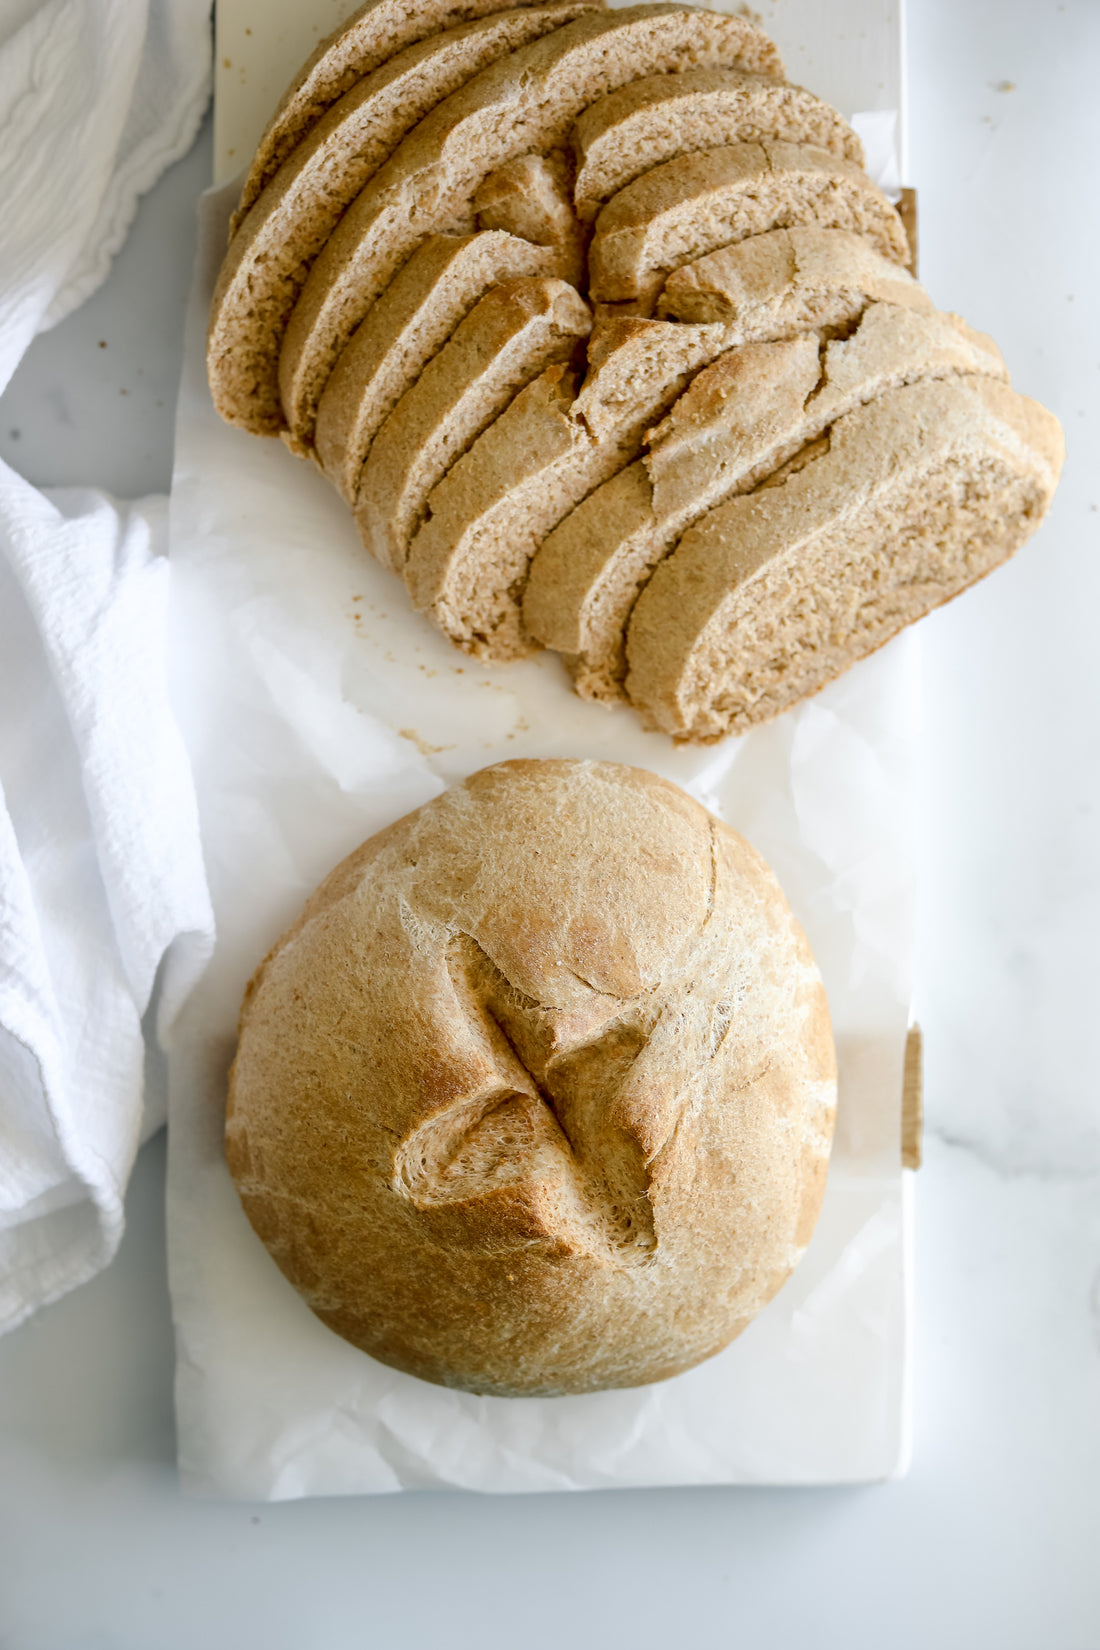 How To Make the Homemade Honey Whole Wheat Bread